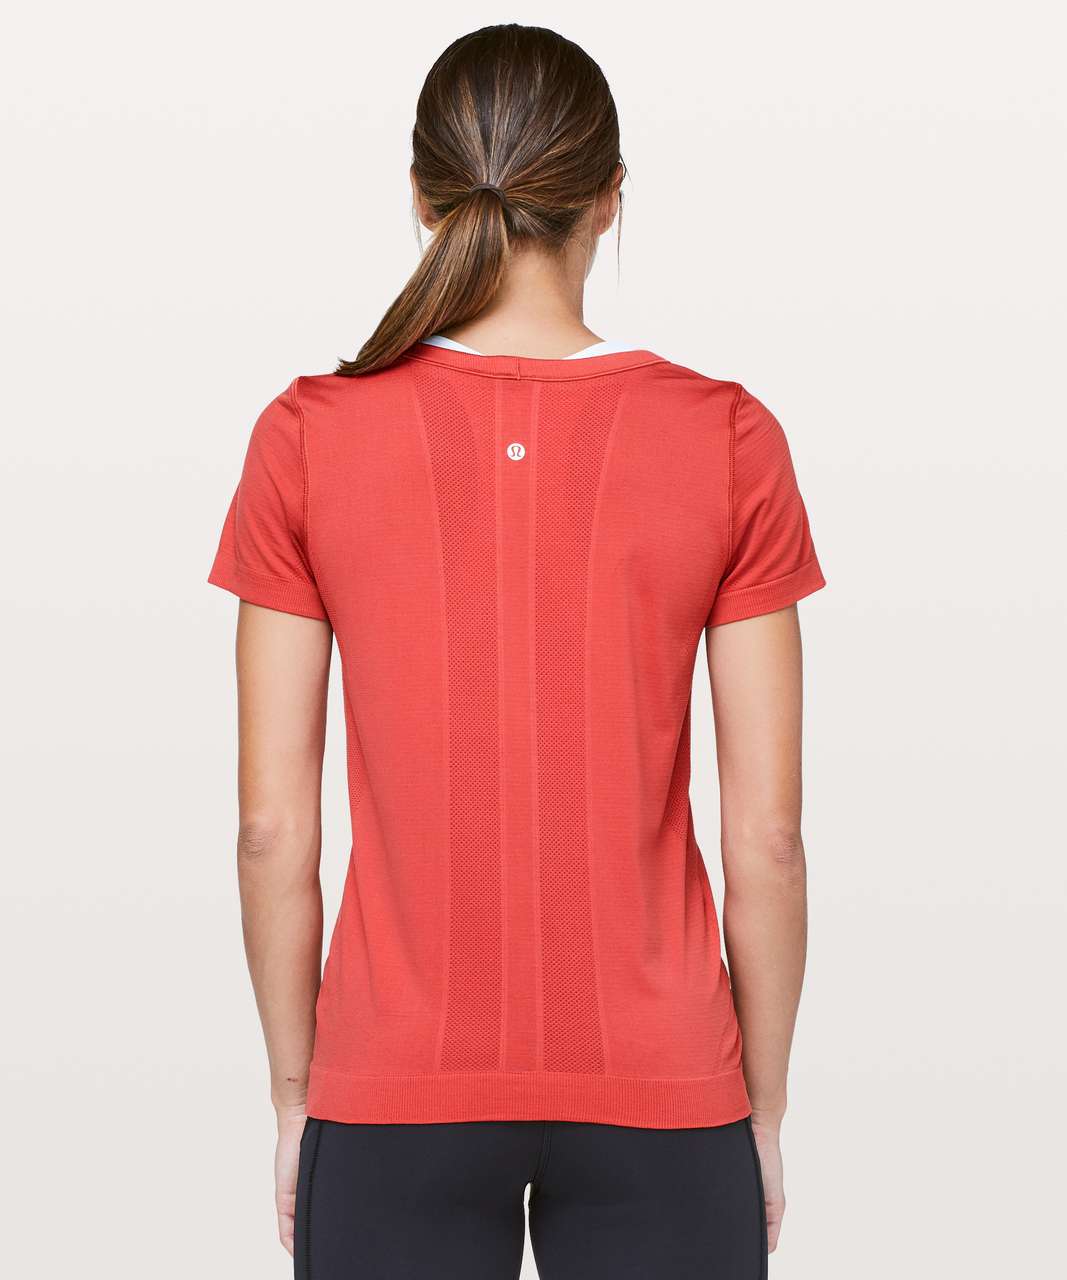 Lululemon Swiftly Tech Short Sleeve (Breeze) *Relaxed Fit - Aries / Aries